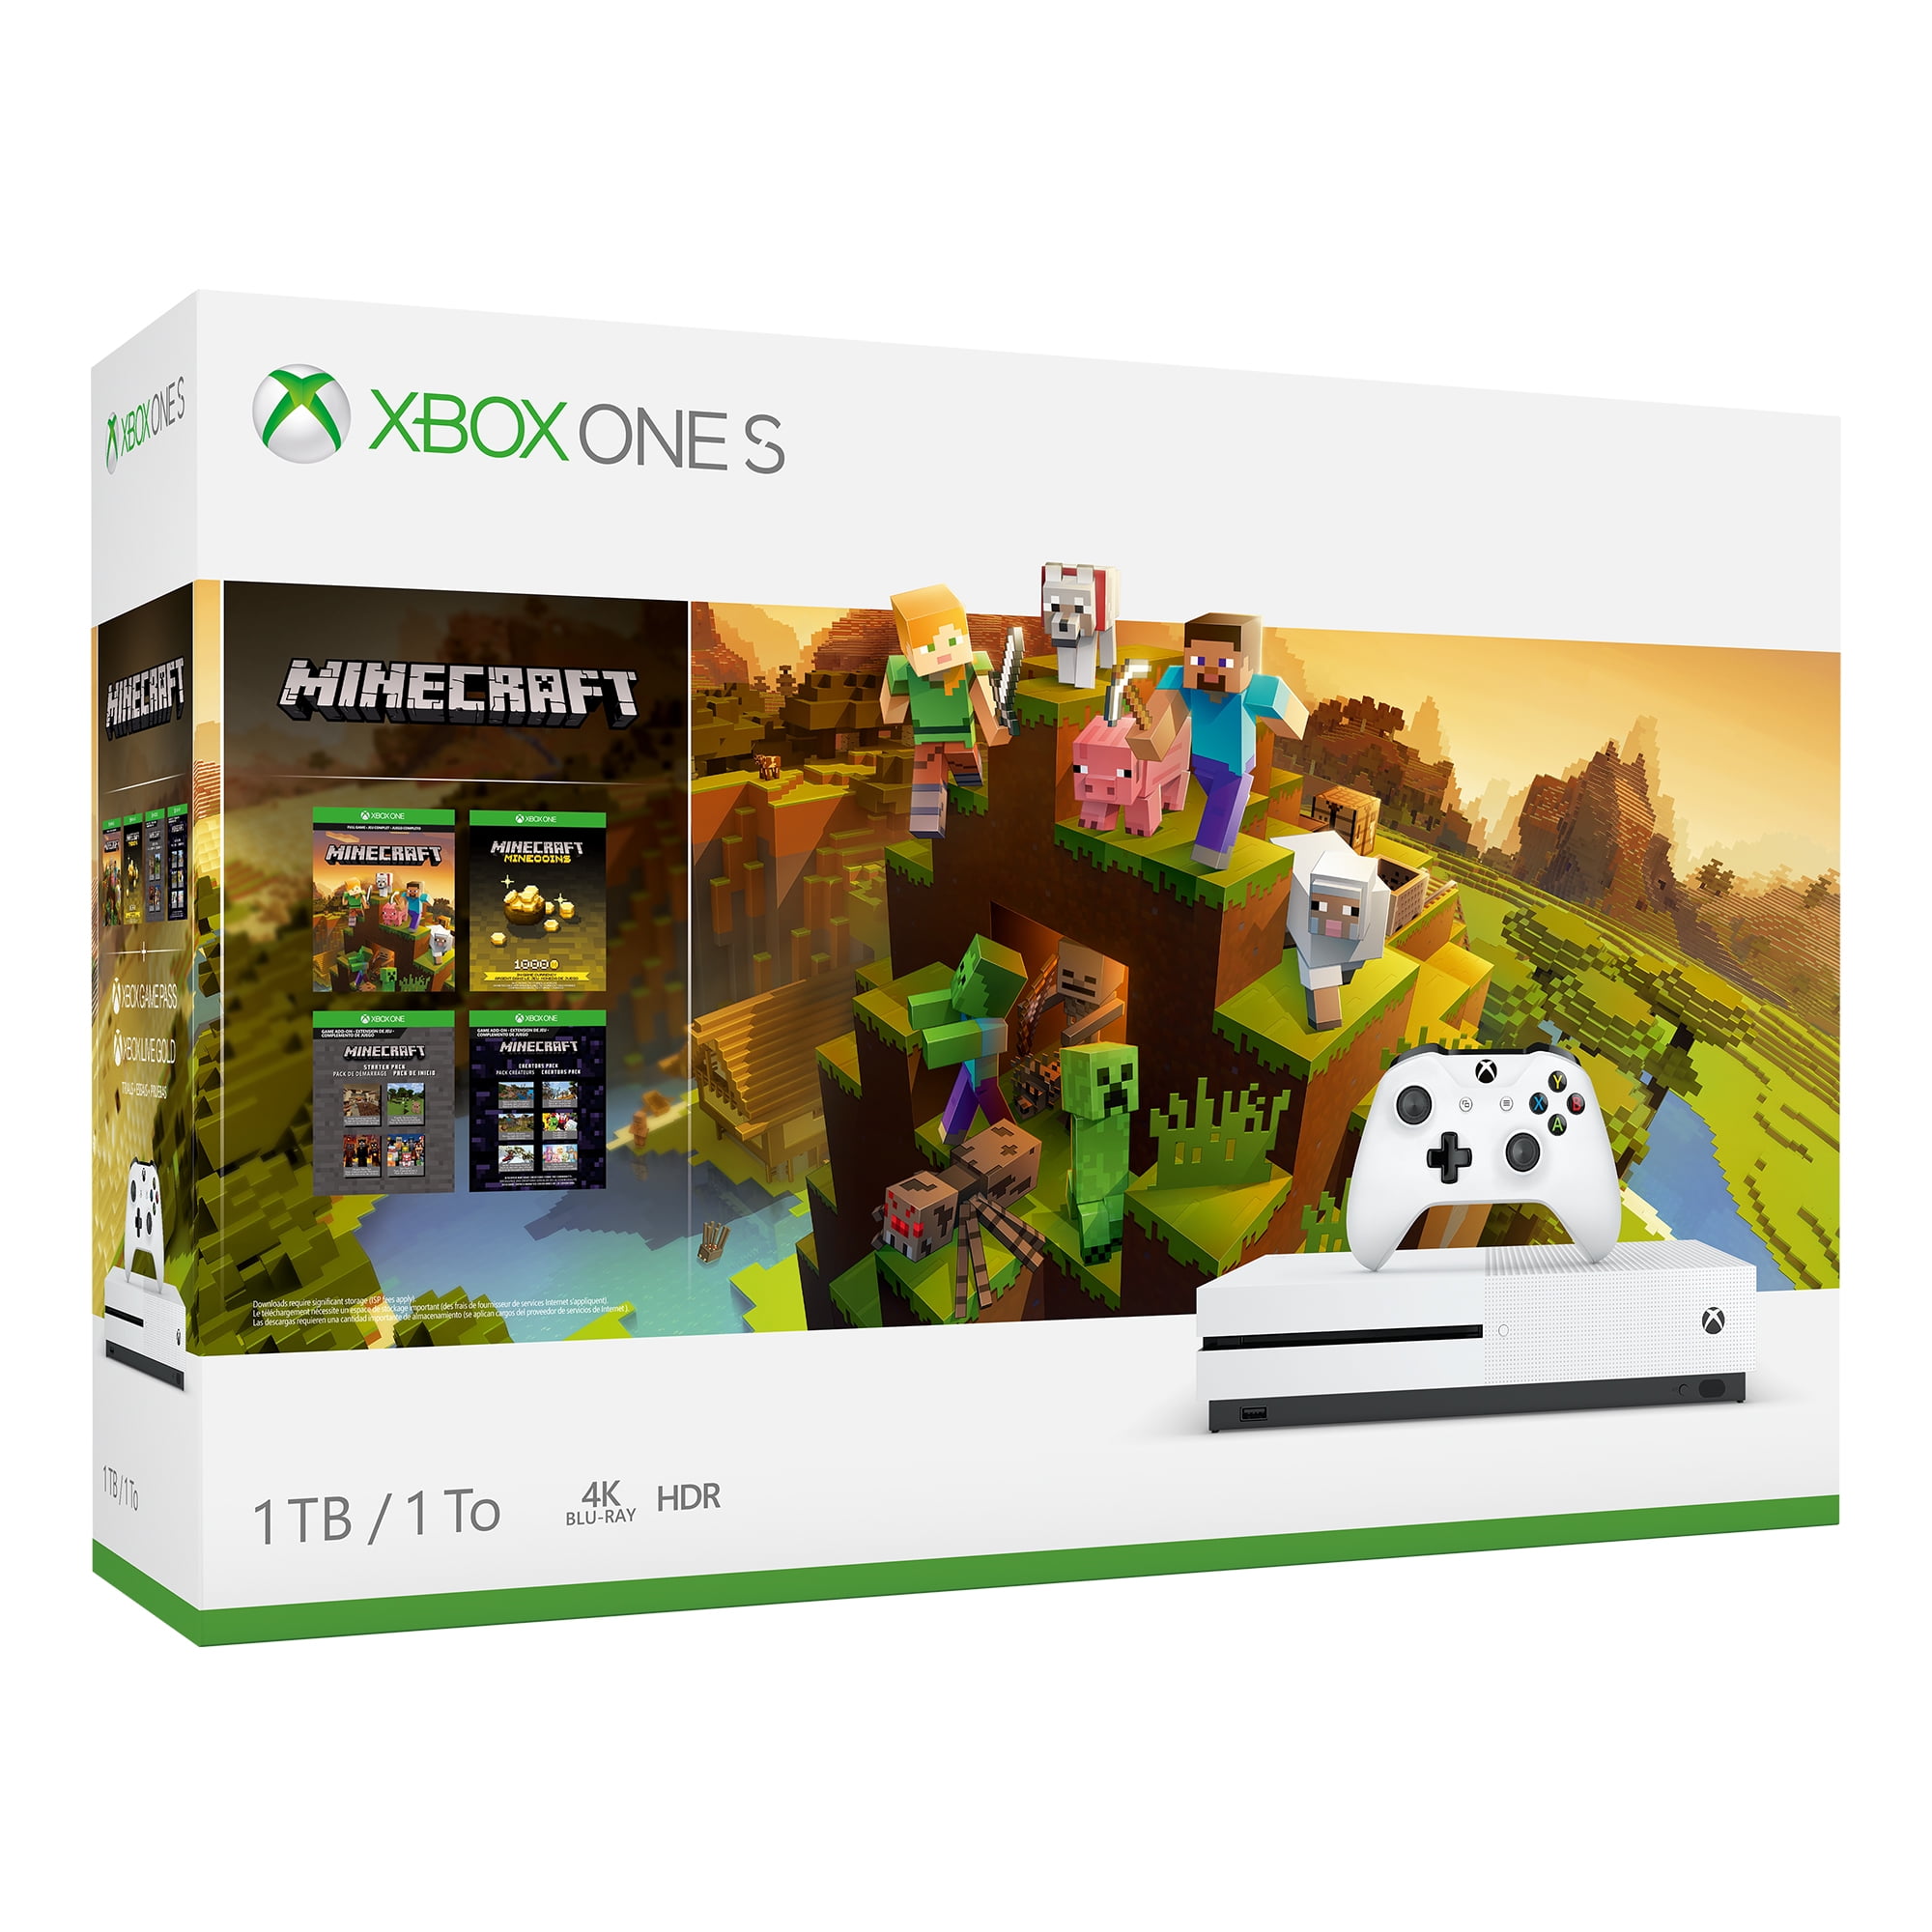 Xbox One S Roblox Bundle Lets You Play and Create Without Limits - Xbox Wire